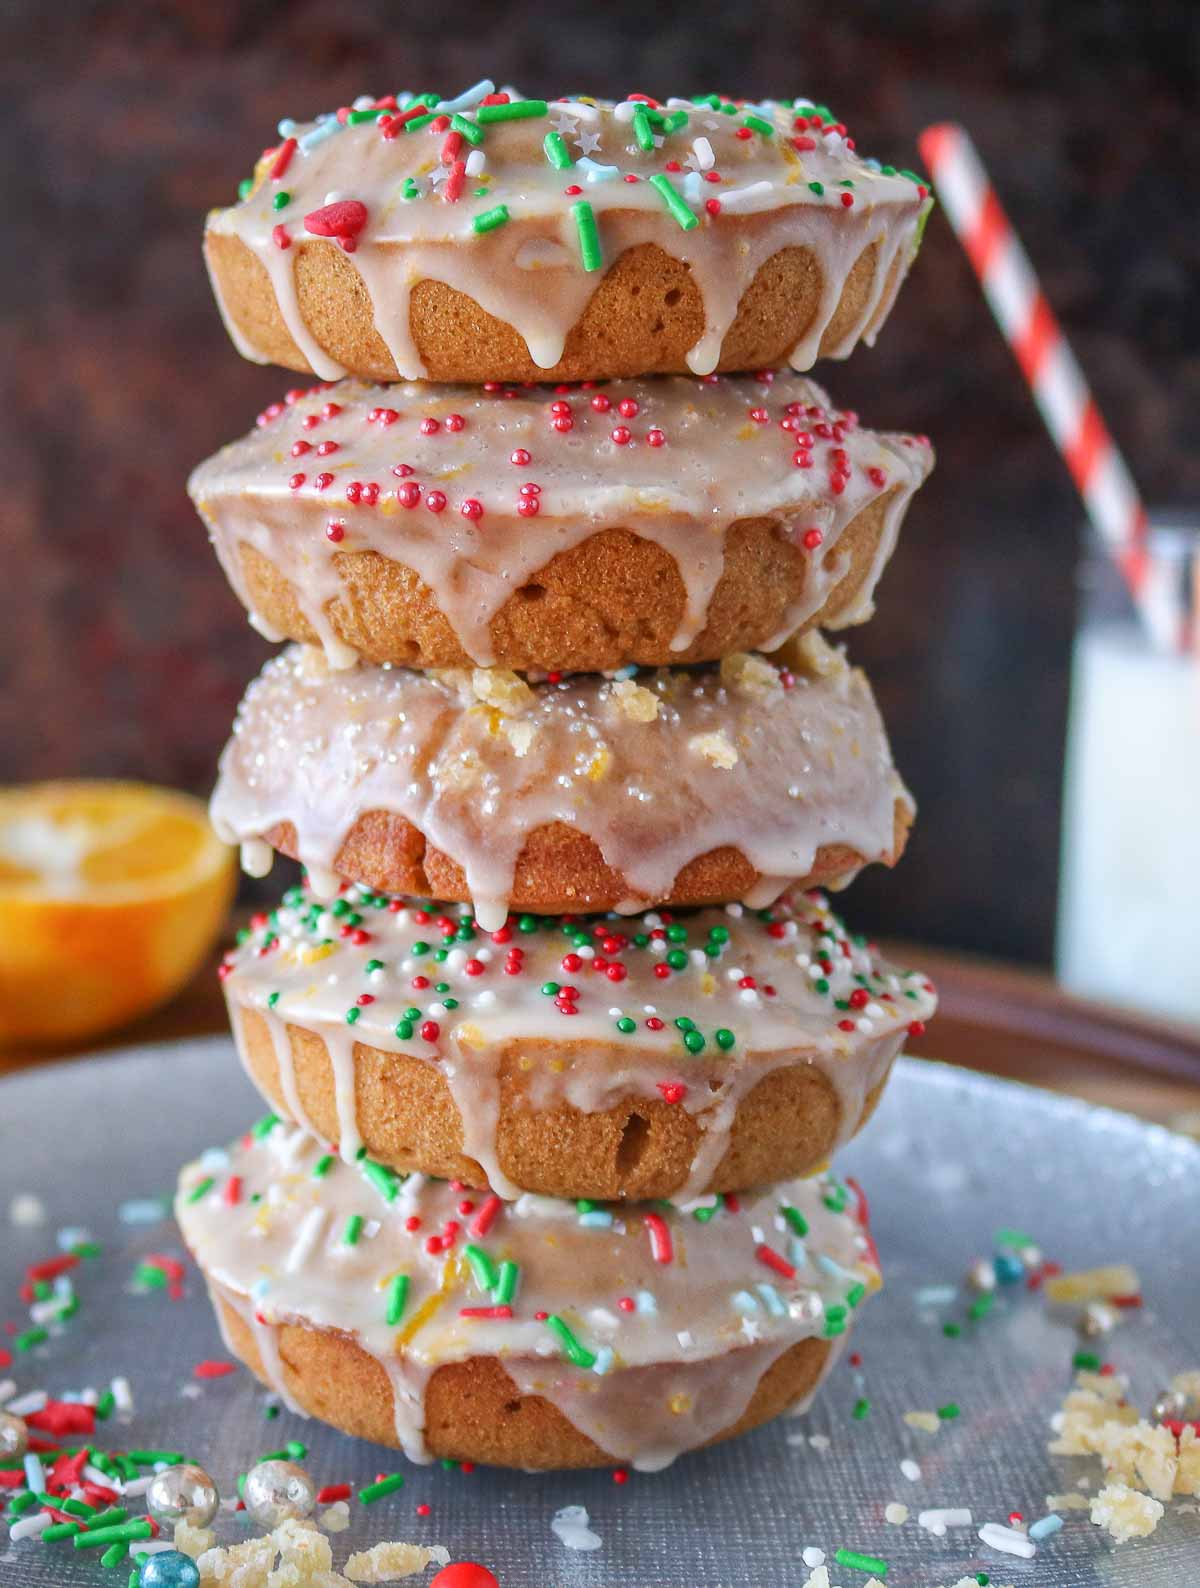 Stack of five glazed gingerbread donuts.